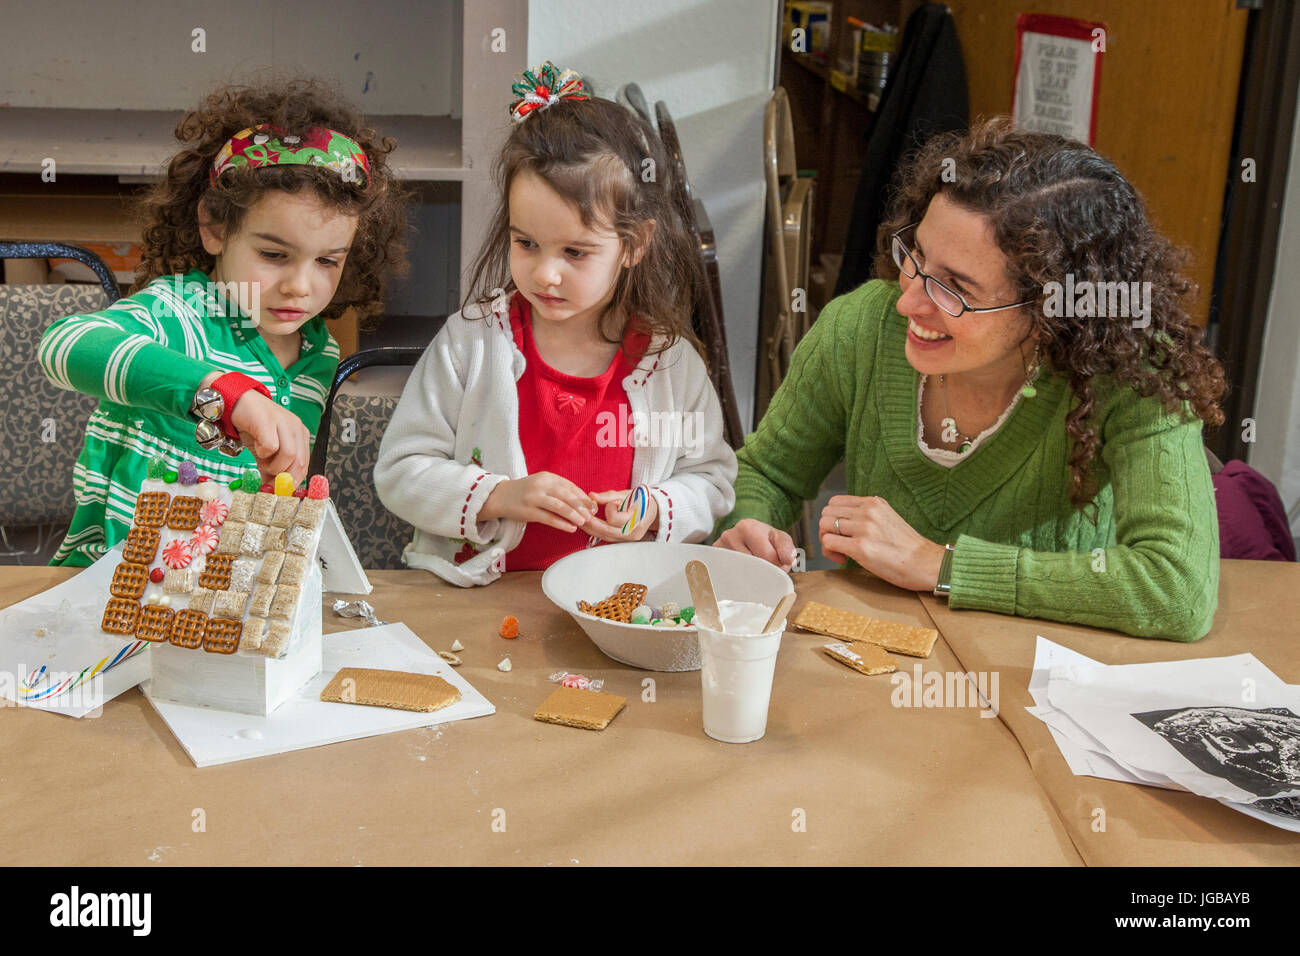 A woman helping  young children with an art project Stock Photo